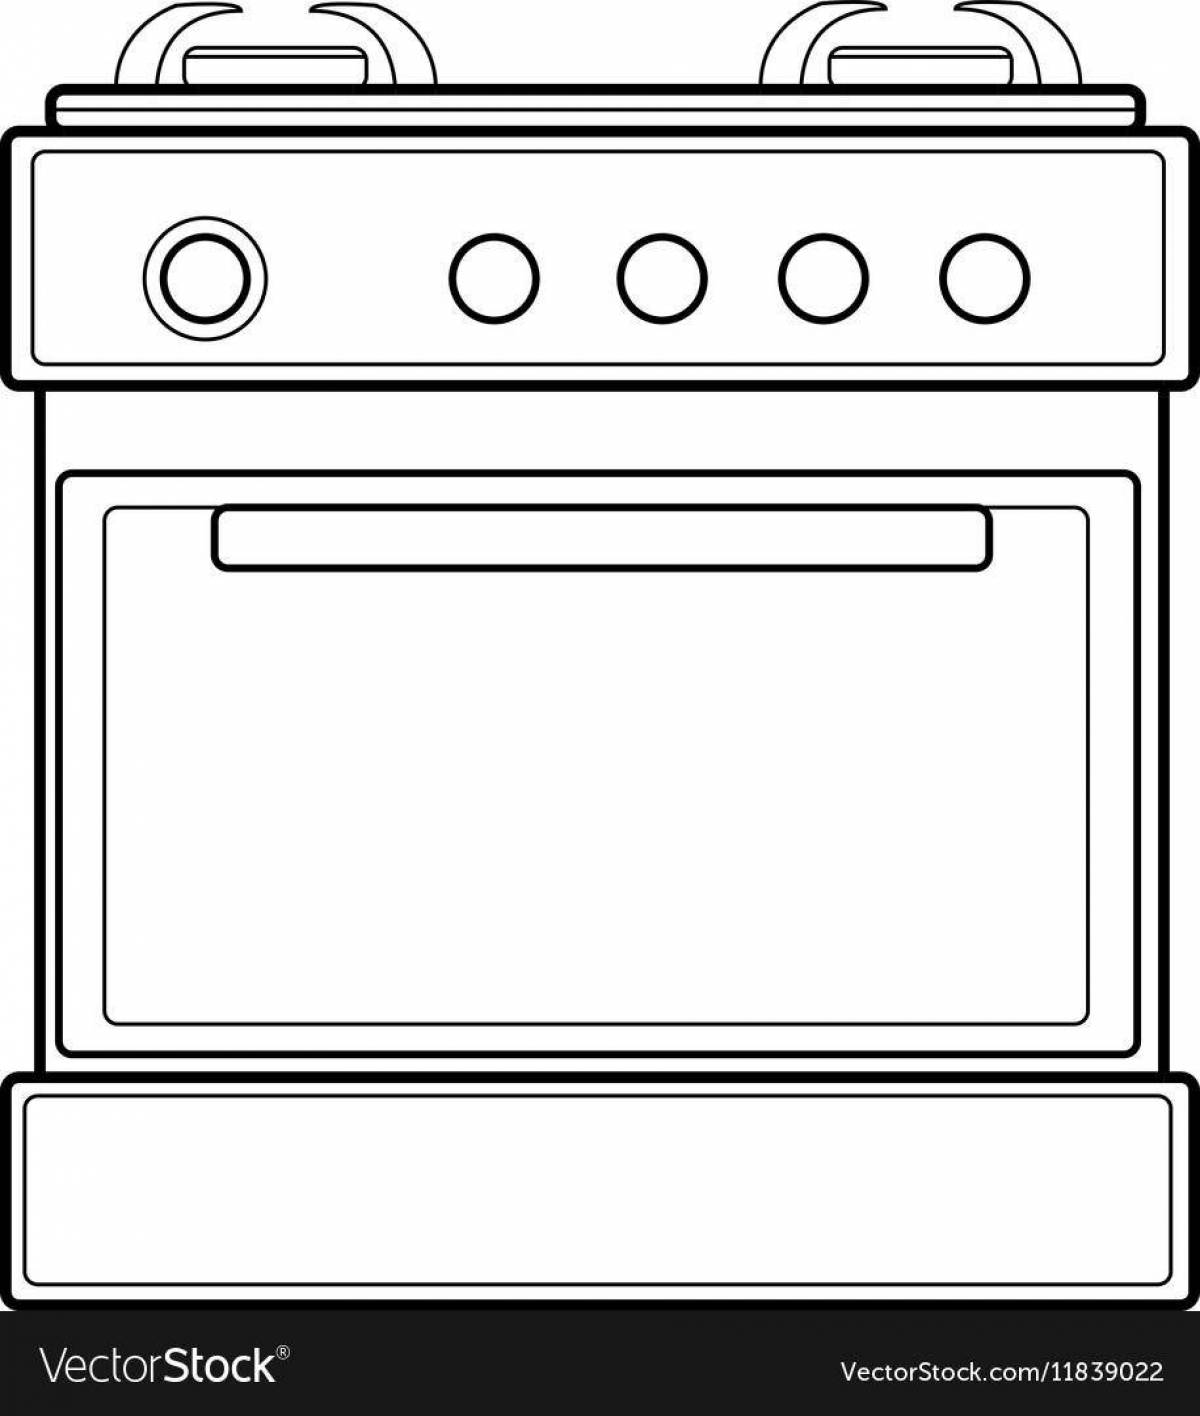 Great cooker coloring page